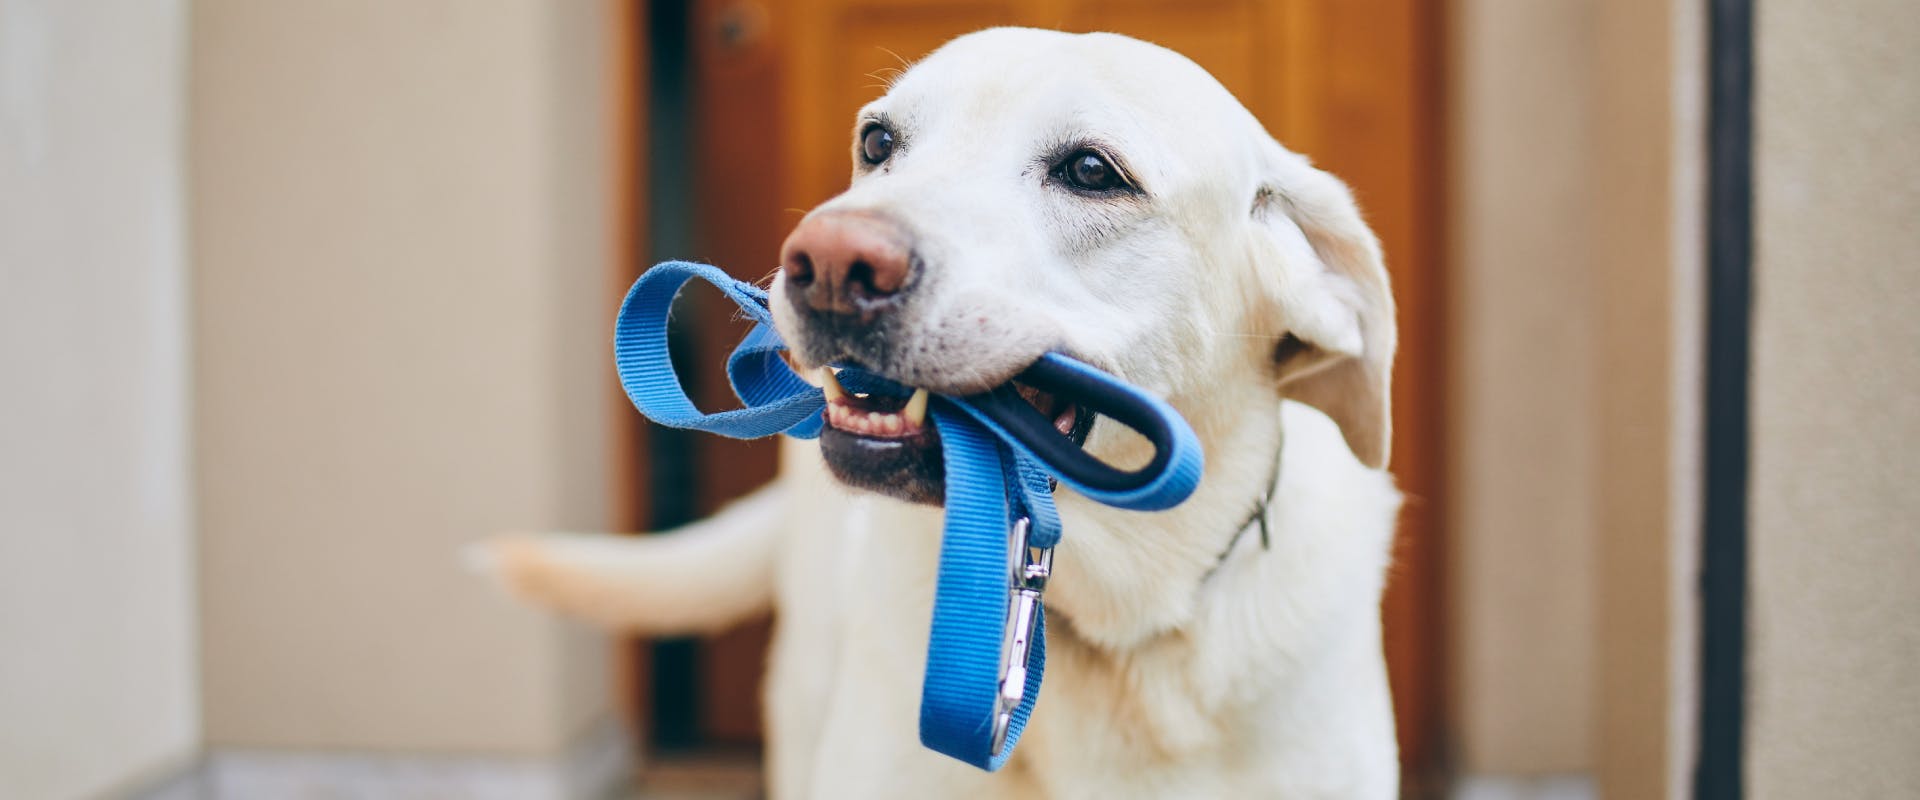 a large white dog stood outside a front door with a blue leash in its mouth